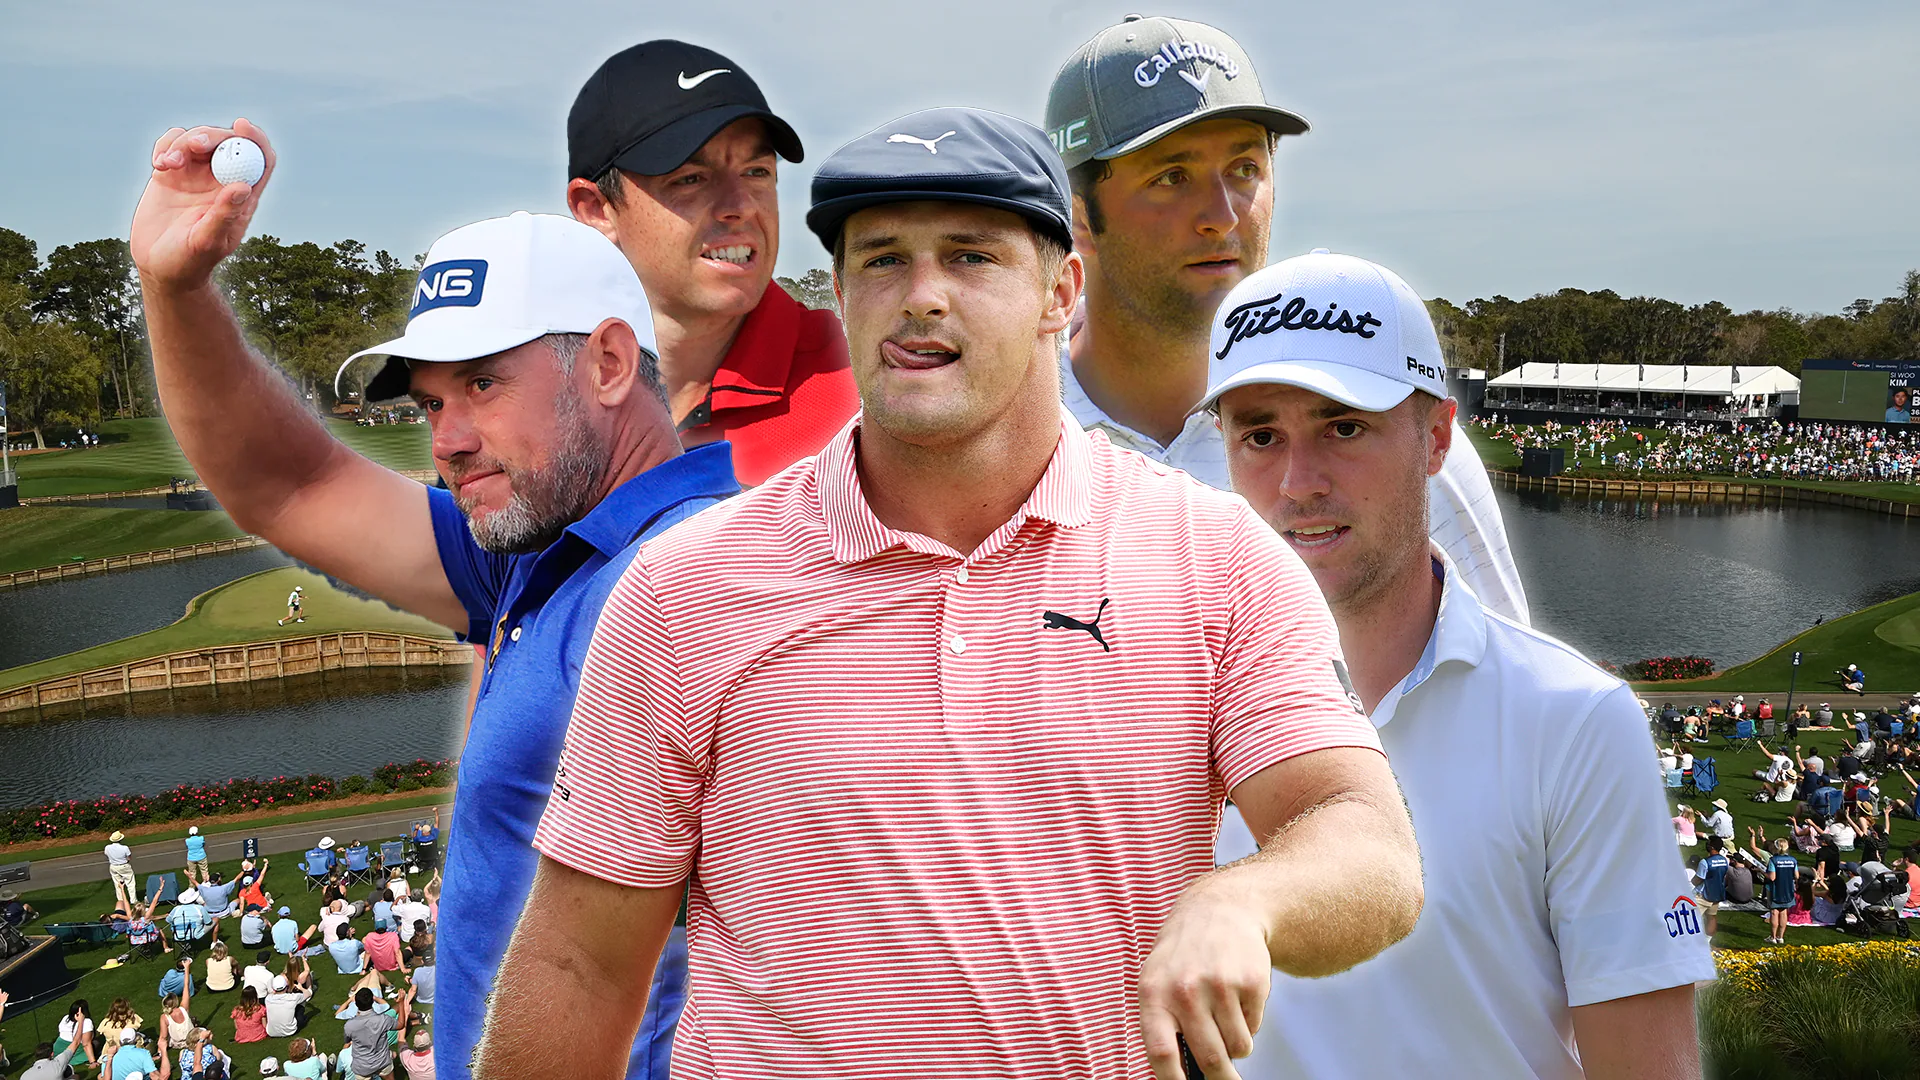 Players 2021: Lee Westwood may be leading, but they’re all chasing Bryson DeChambeau